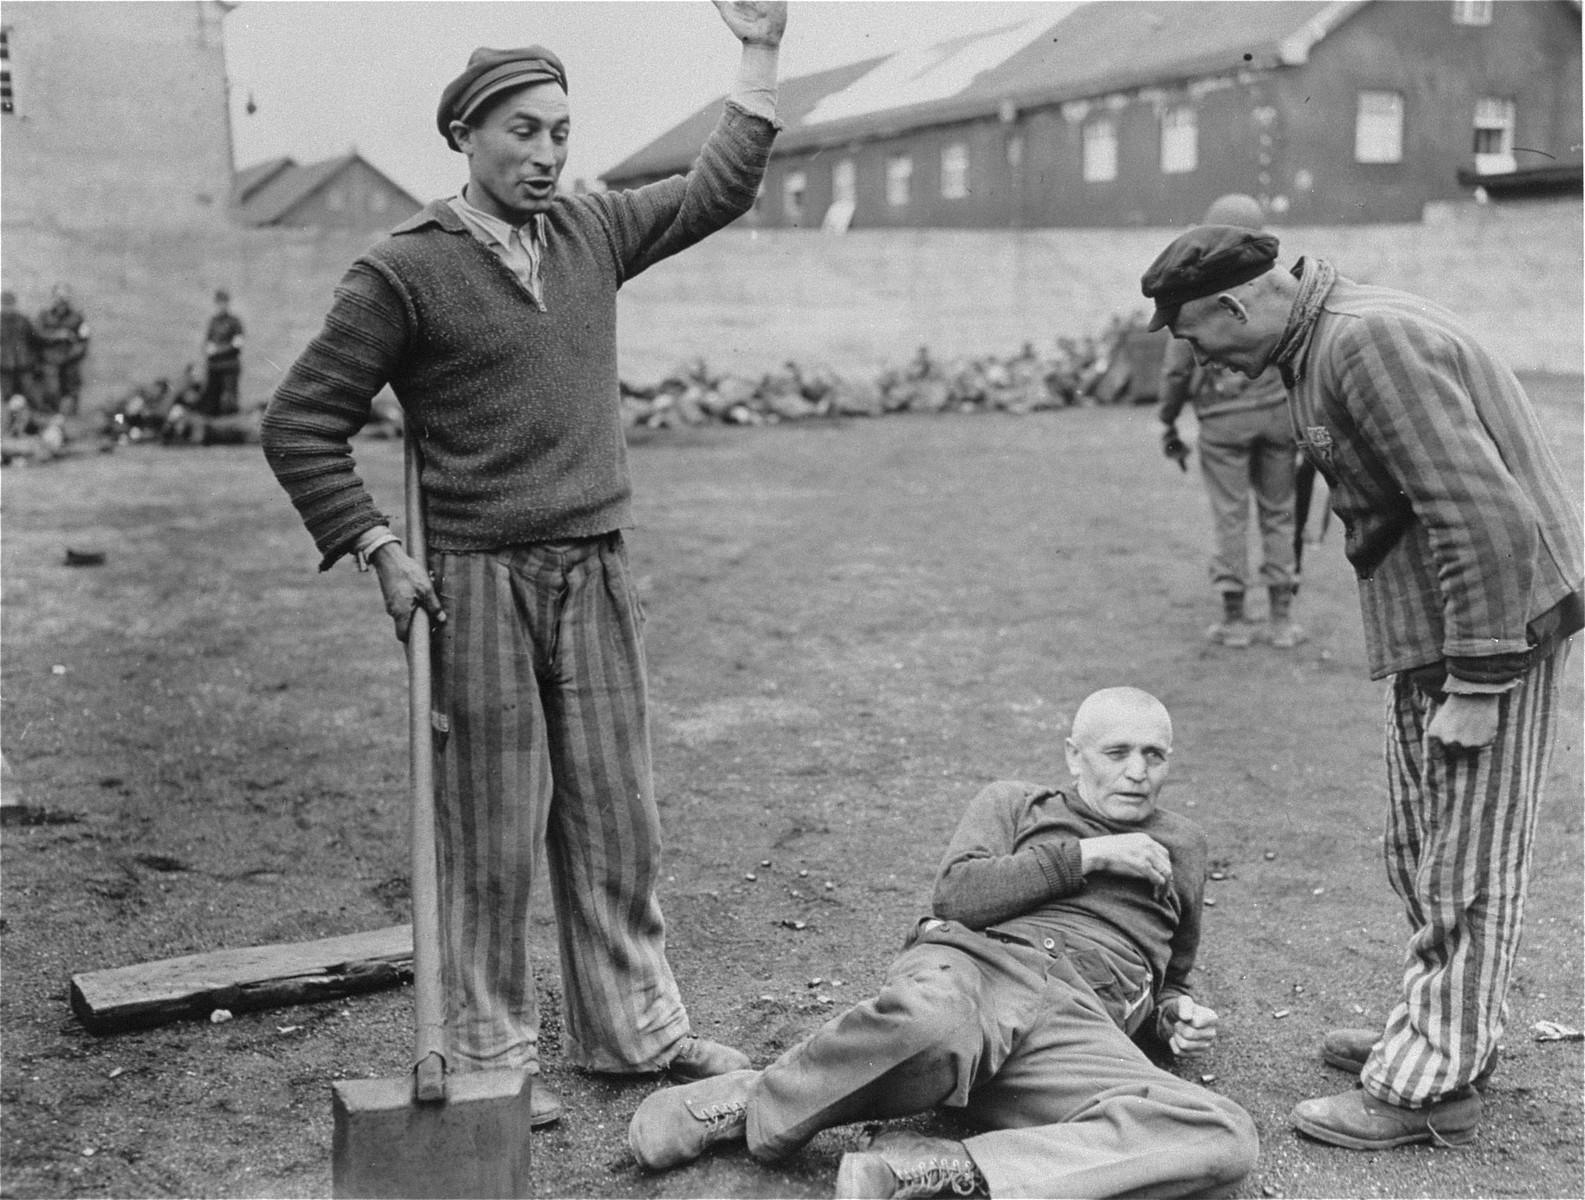 Survivors in Dachau berate an SS guard captured by U.S. troops, while in the background American soldiers summarily execute other camp guards.